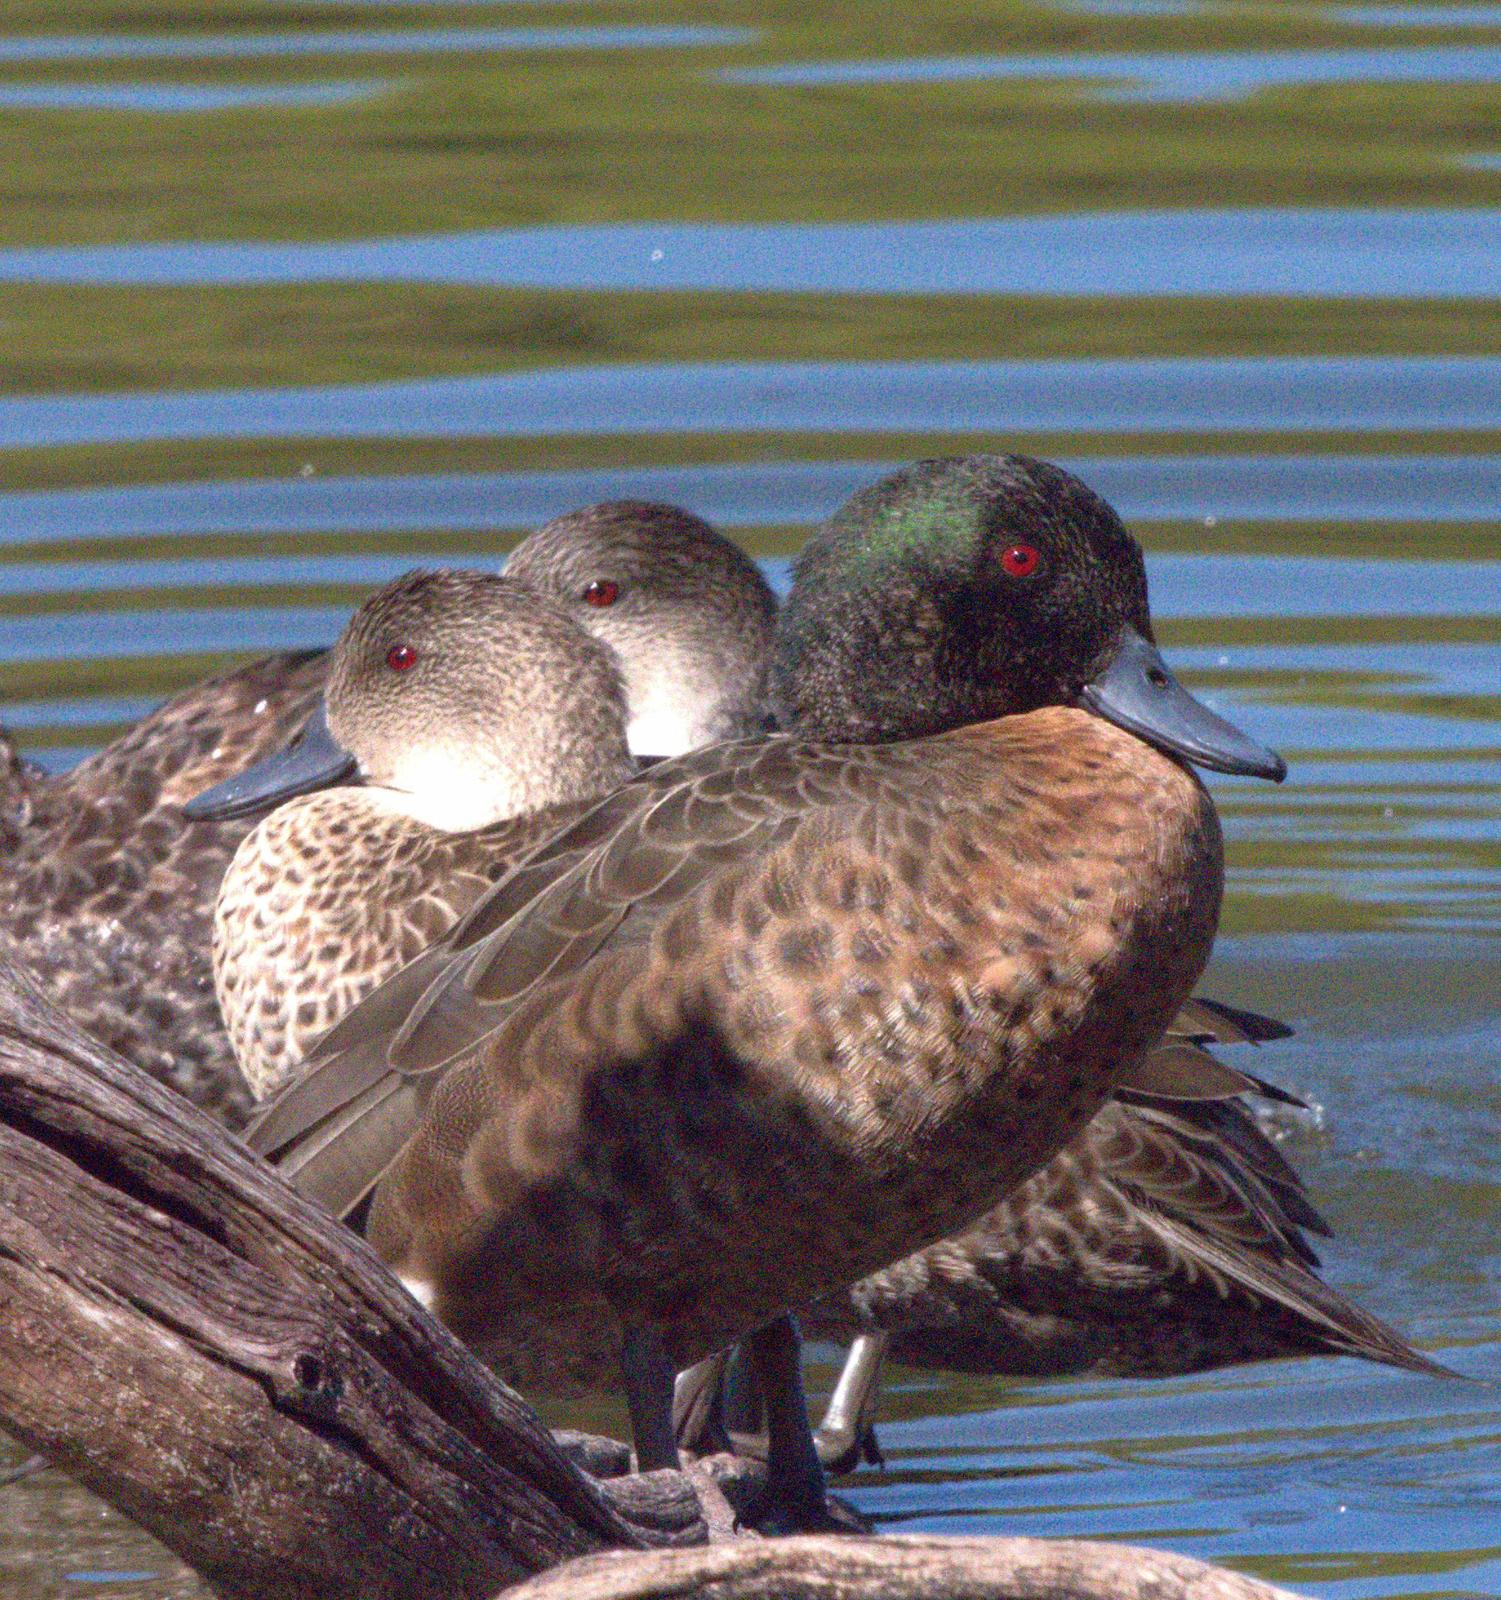 Chestnut Teal Photo by Peter Lowe